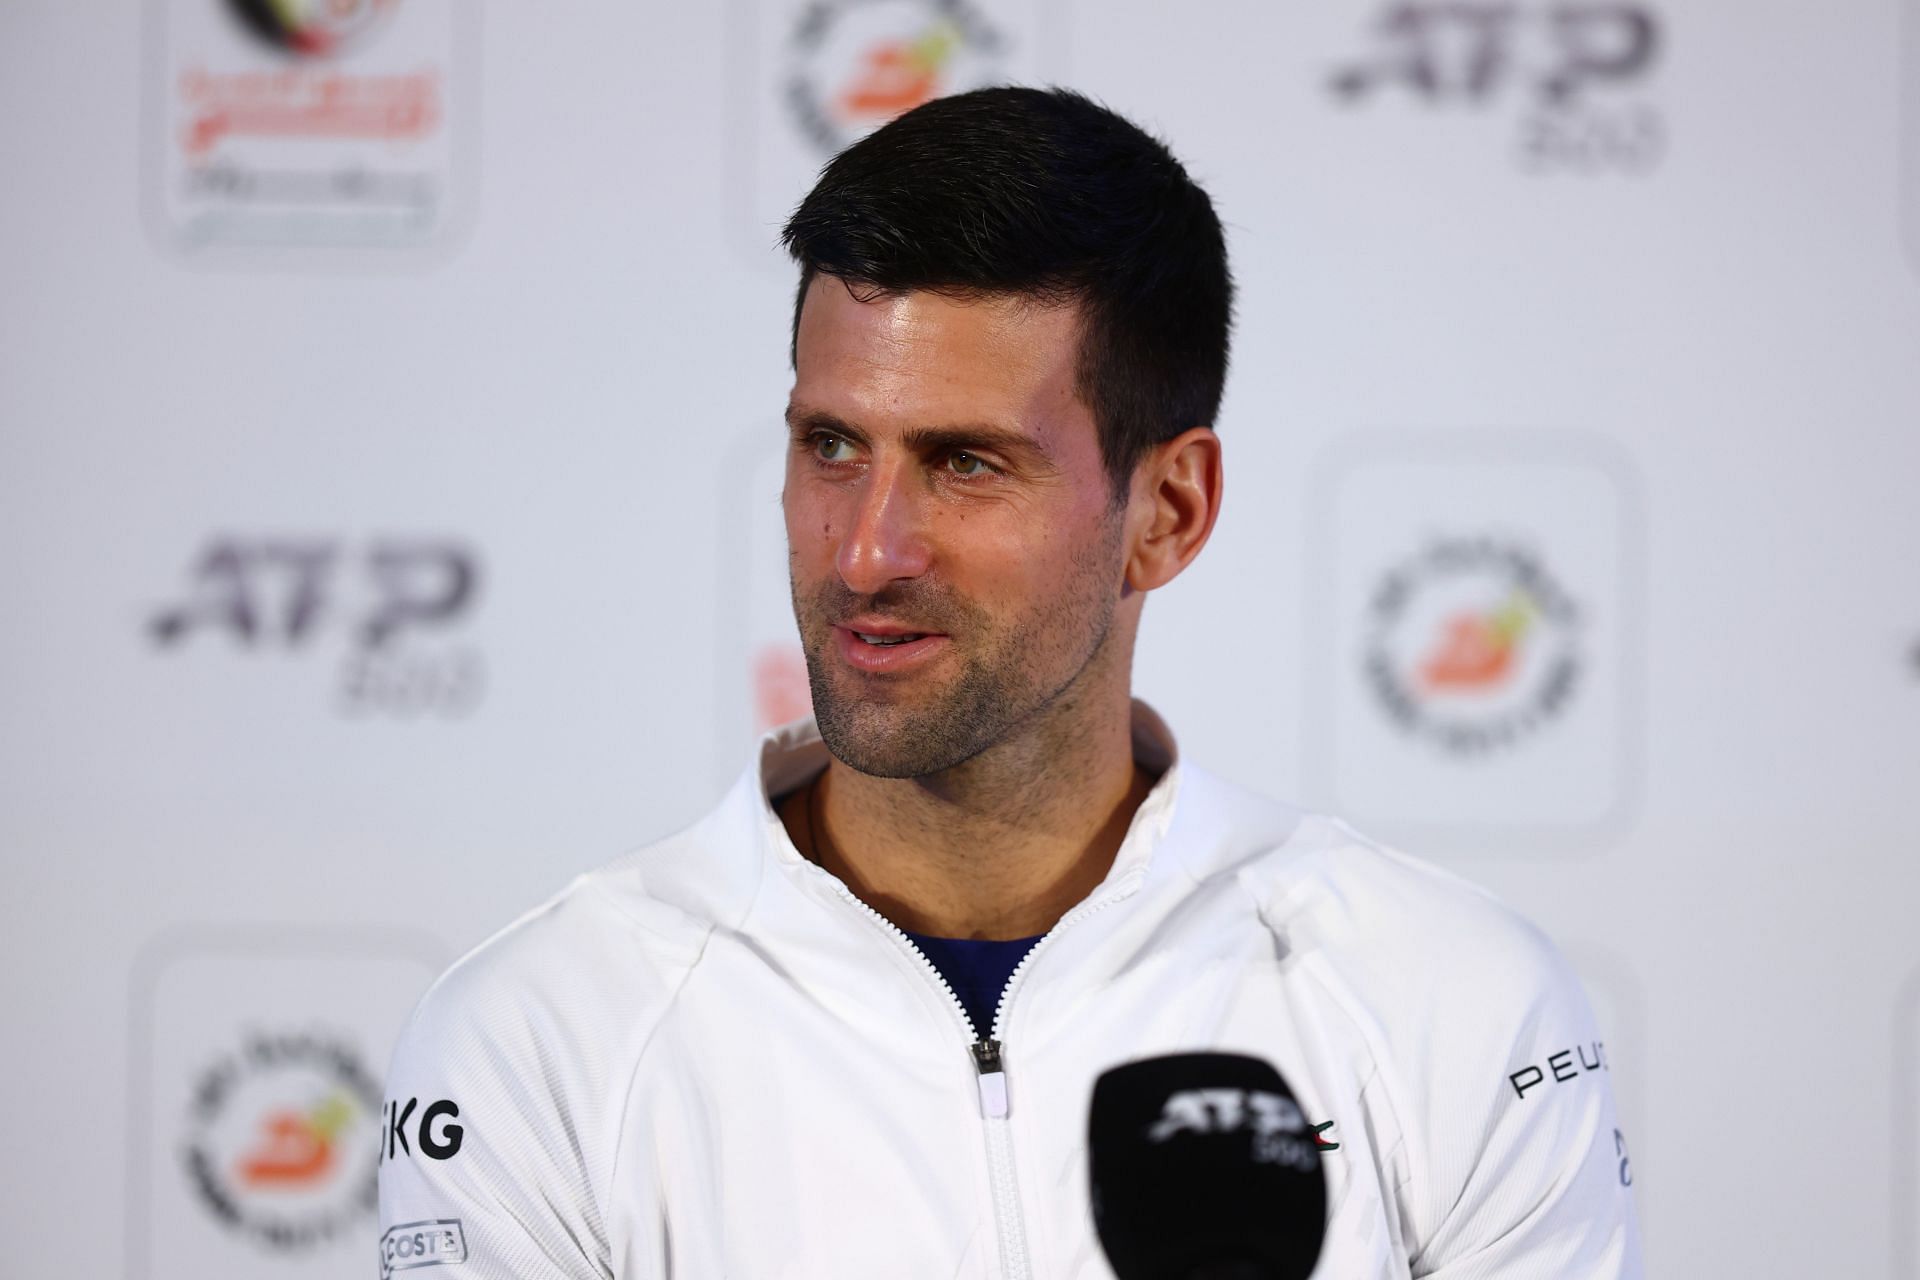 Novak Djokovic has been allowed to play in only one tennis tournament in 2022 so far